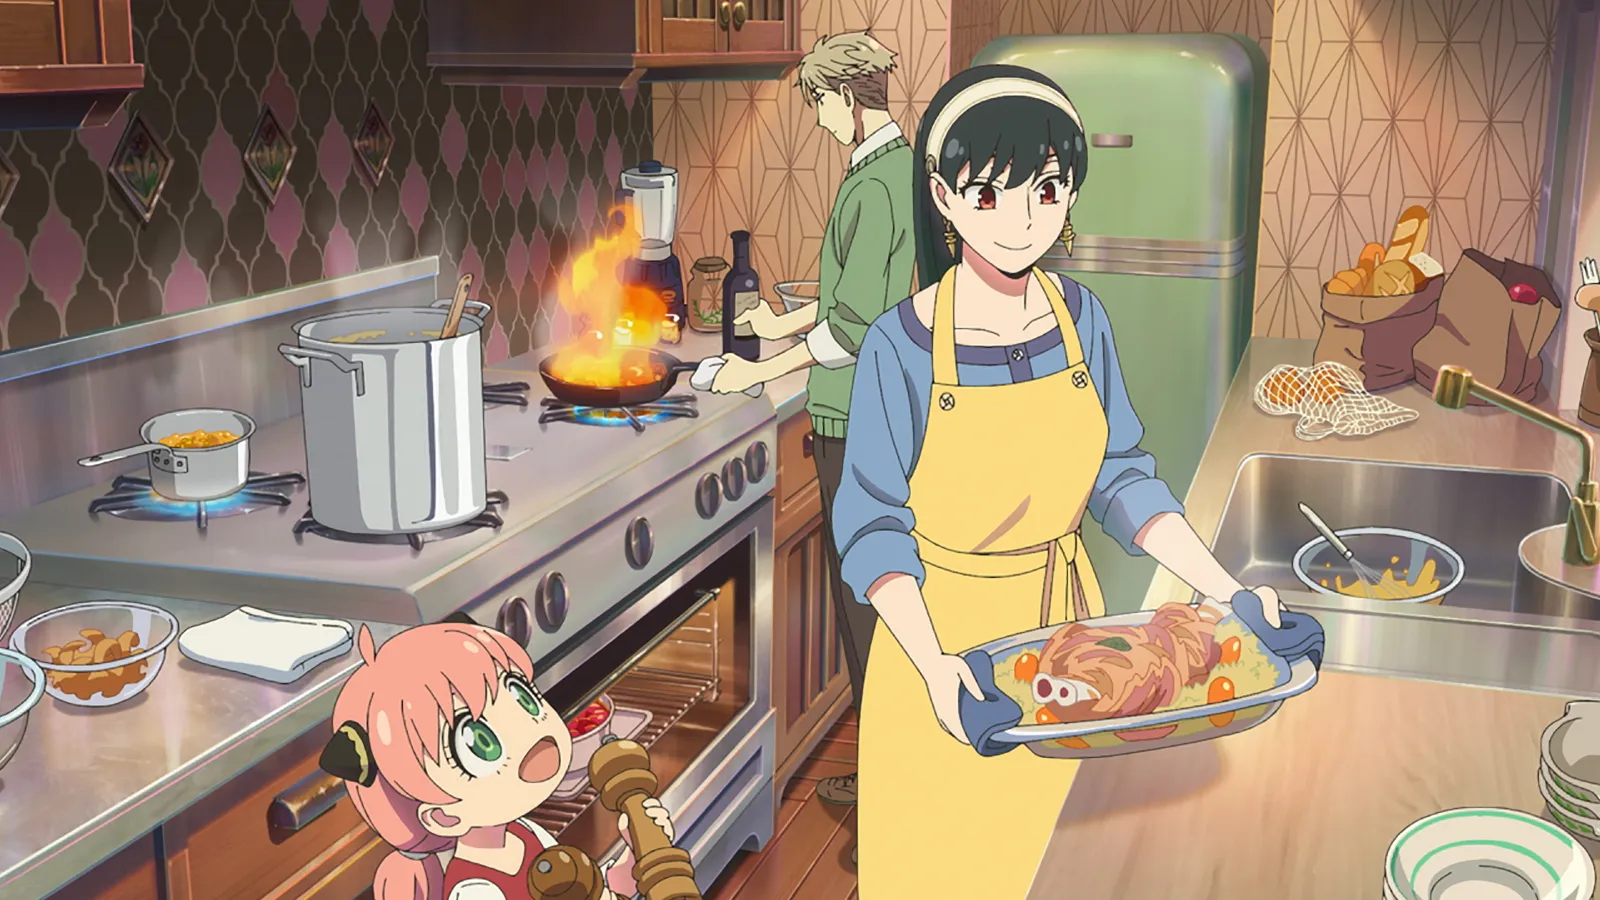 Anya, Loid, and Yor from Spy x Family are all in the kitchen, cooking up a meal together. 